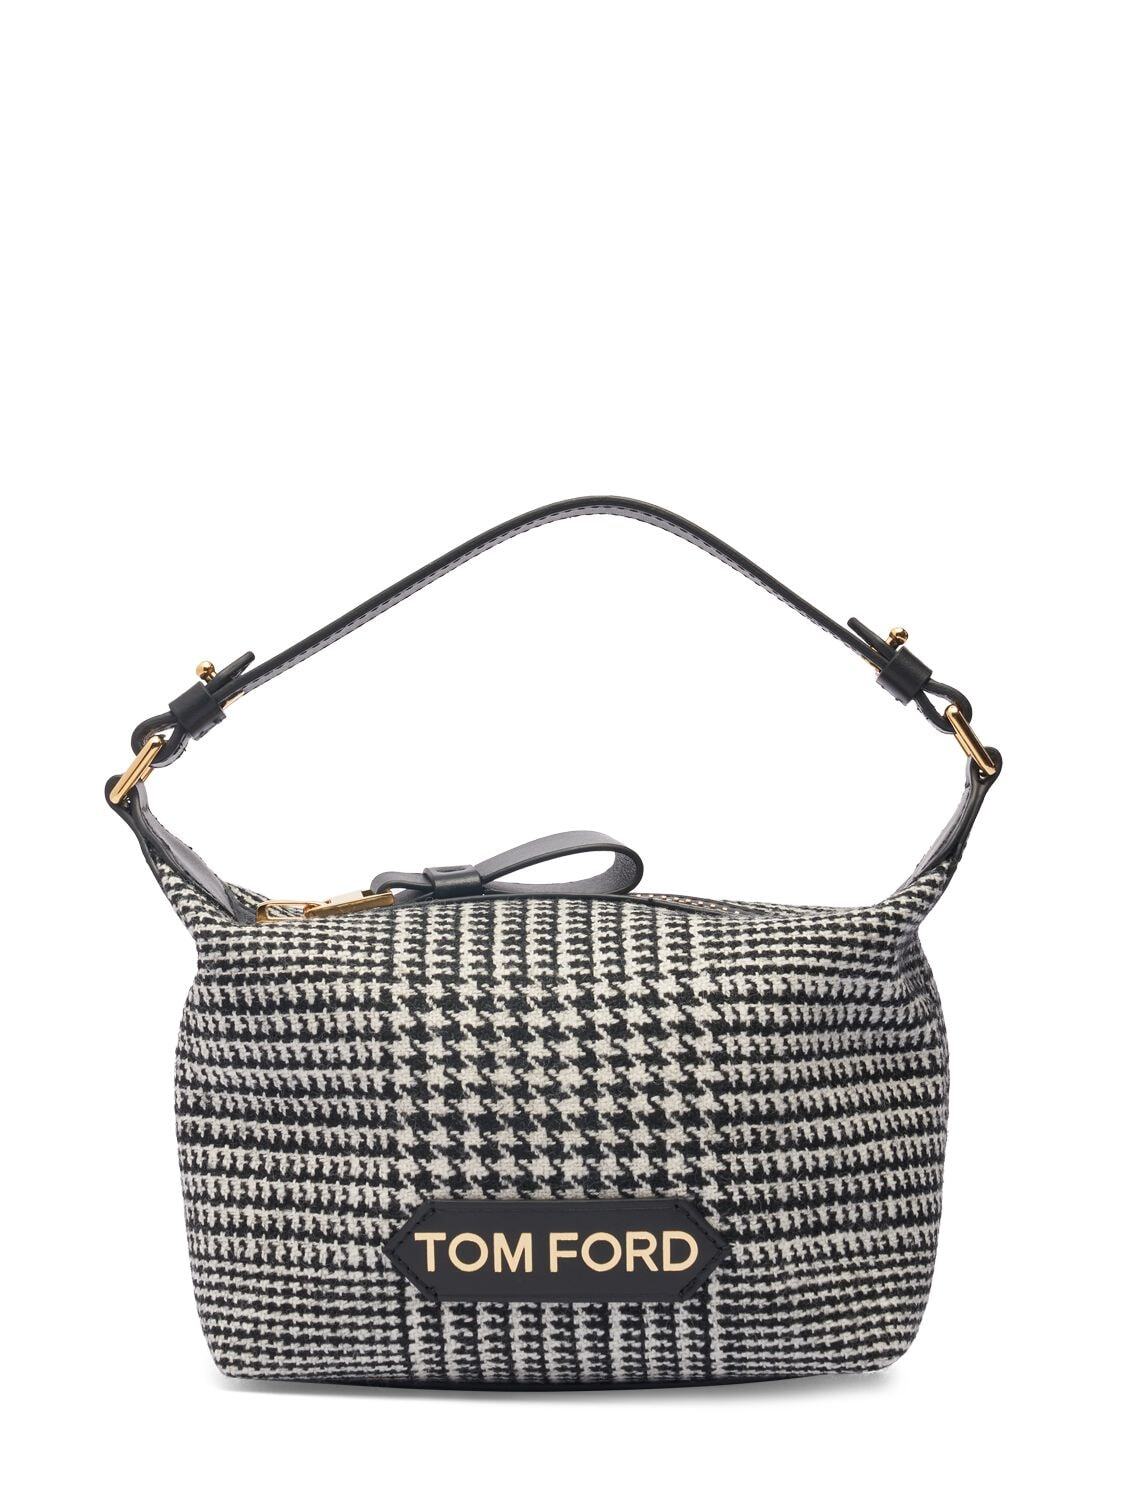 TOM FORD Small Logo Canvas Top Handle Bag in black